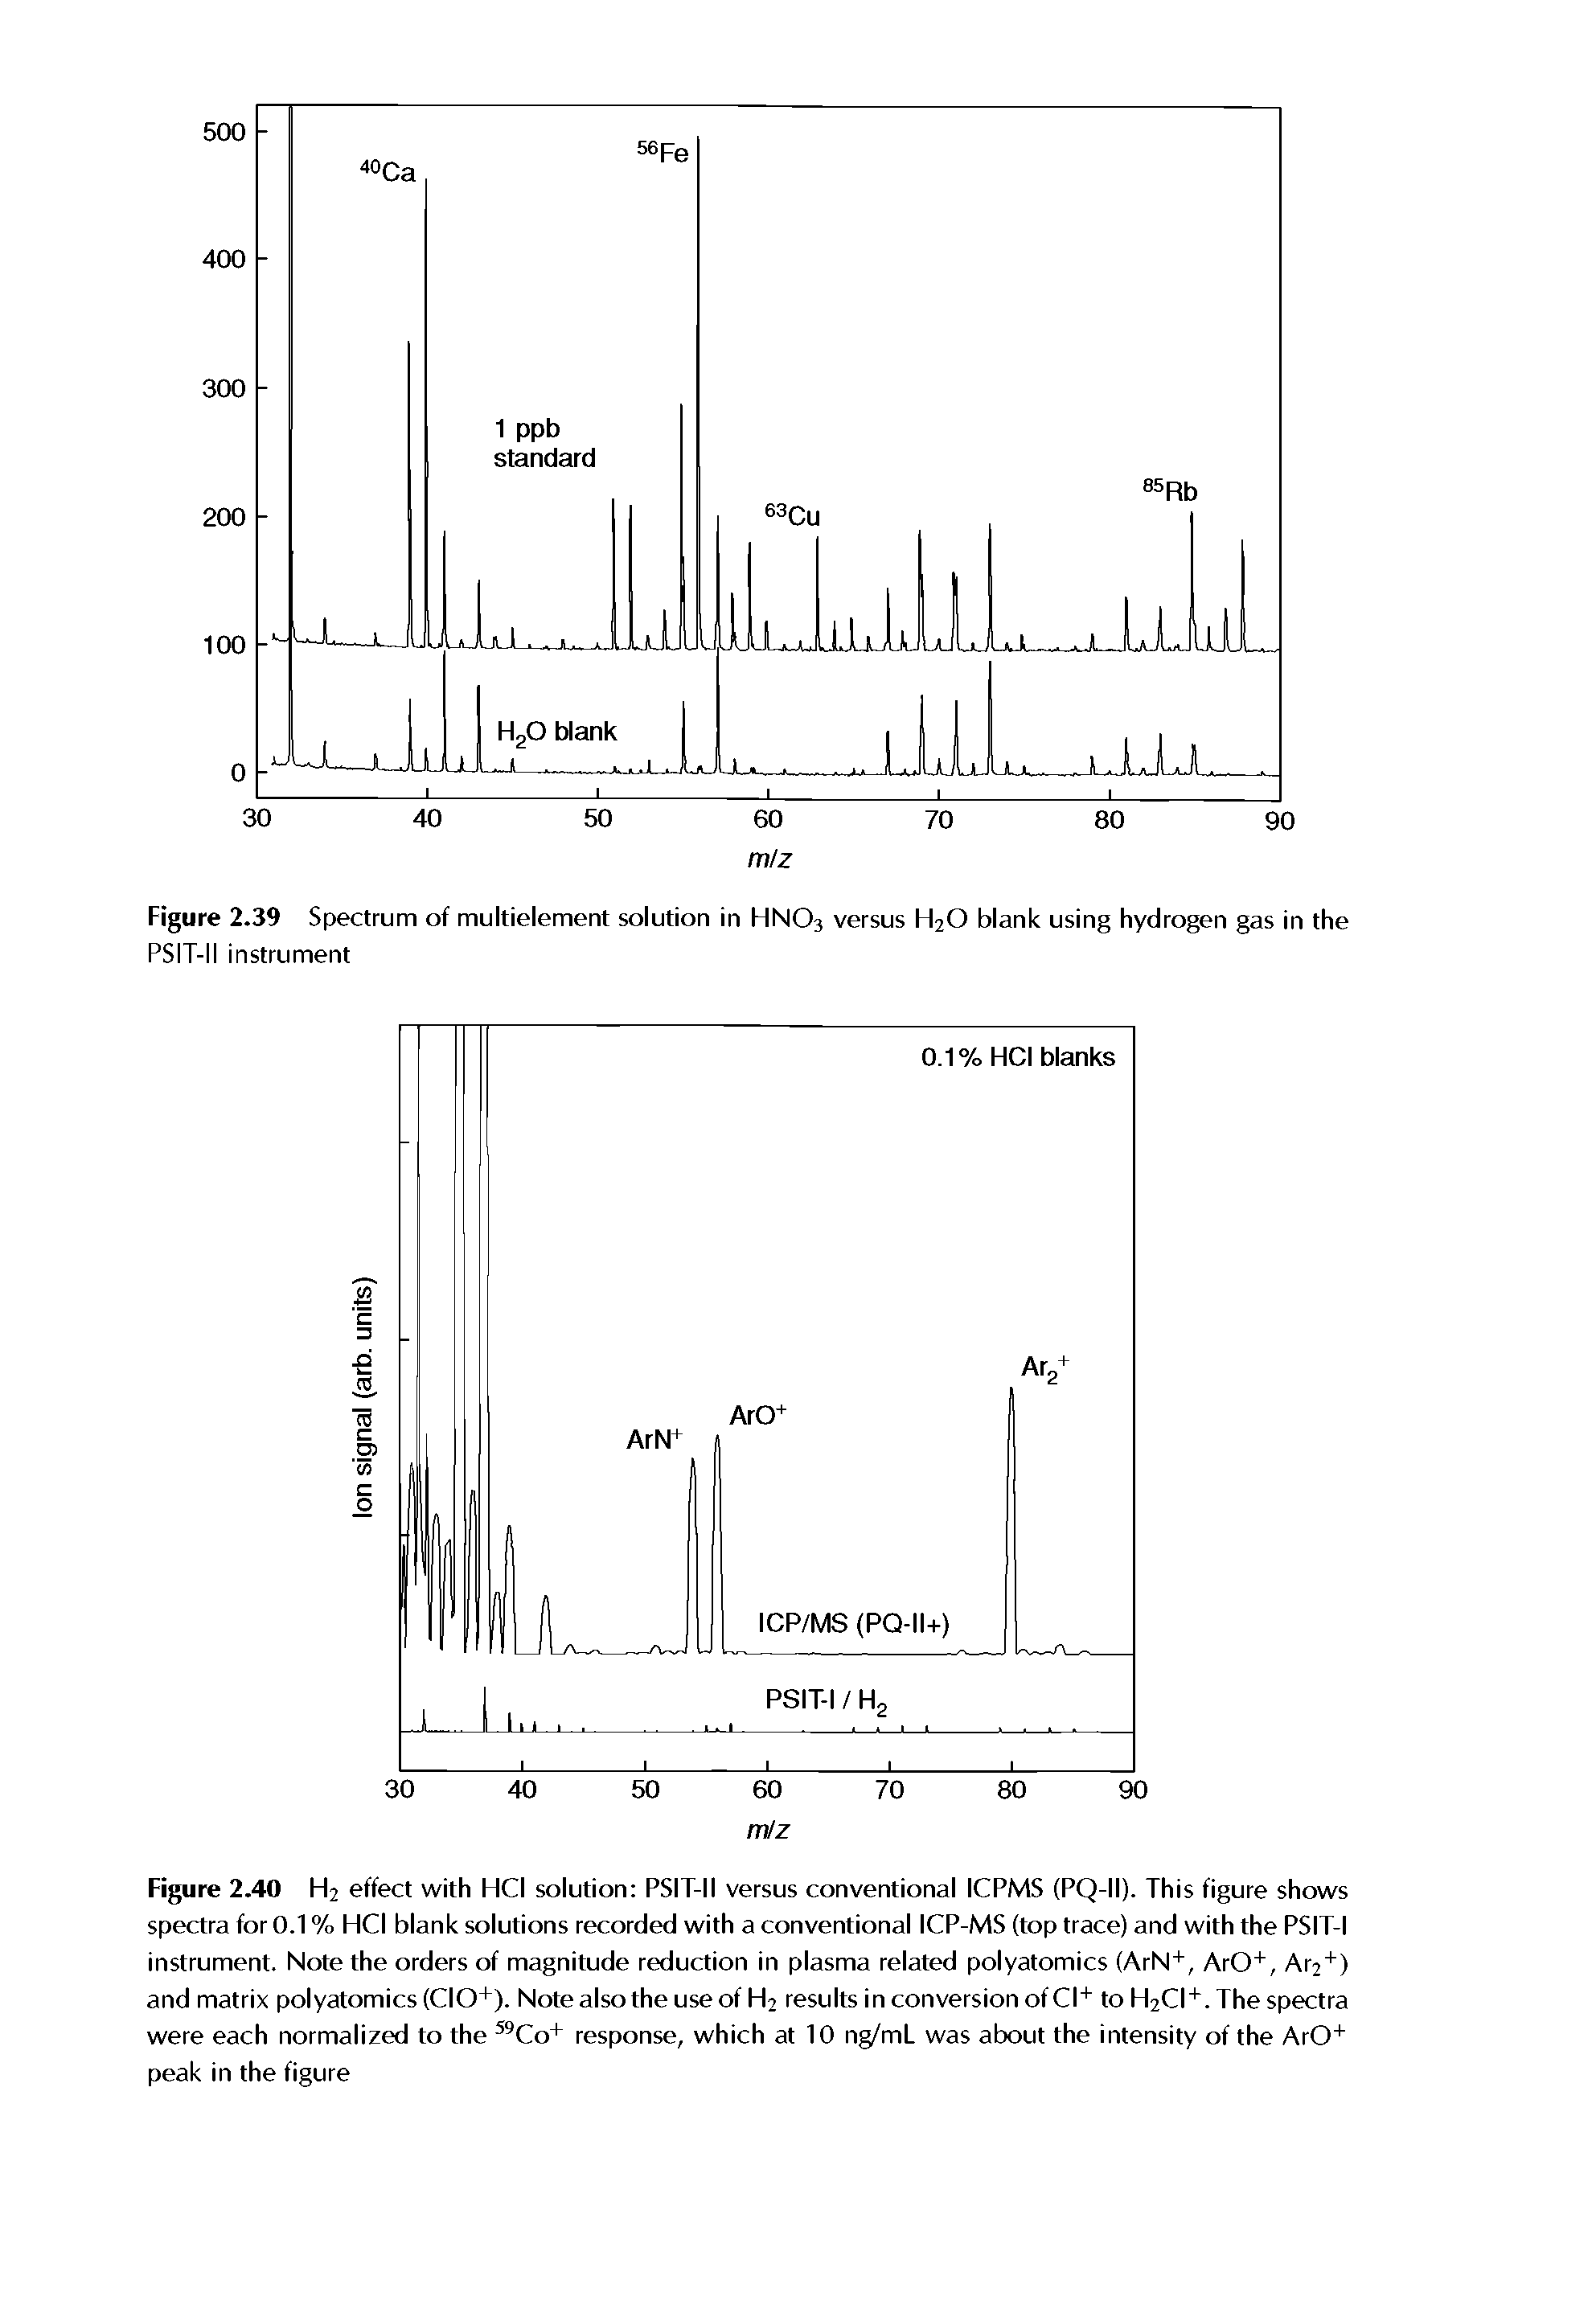 Figure 2.40 H2 effect with HCI solution PSIT-II versus conventional ICPMS (PQ-II). This figure shows spectra for 0.1 % HCI blank solutions recorded with a conventional ICP-MS (top trace) and with the PSIT-I instrument. Note the orders of magnitude reduction in plasma related polyatomics (ArN+, ArO", Ar2 ) and matrix polyatomics (CIO+). Note also the use of H2 results in conversion of Cl" to H2CI. The spectra were each normalized to the Co+ response, which at 10 ng/mL was about the intensity of the ArO" peak in the figure...